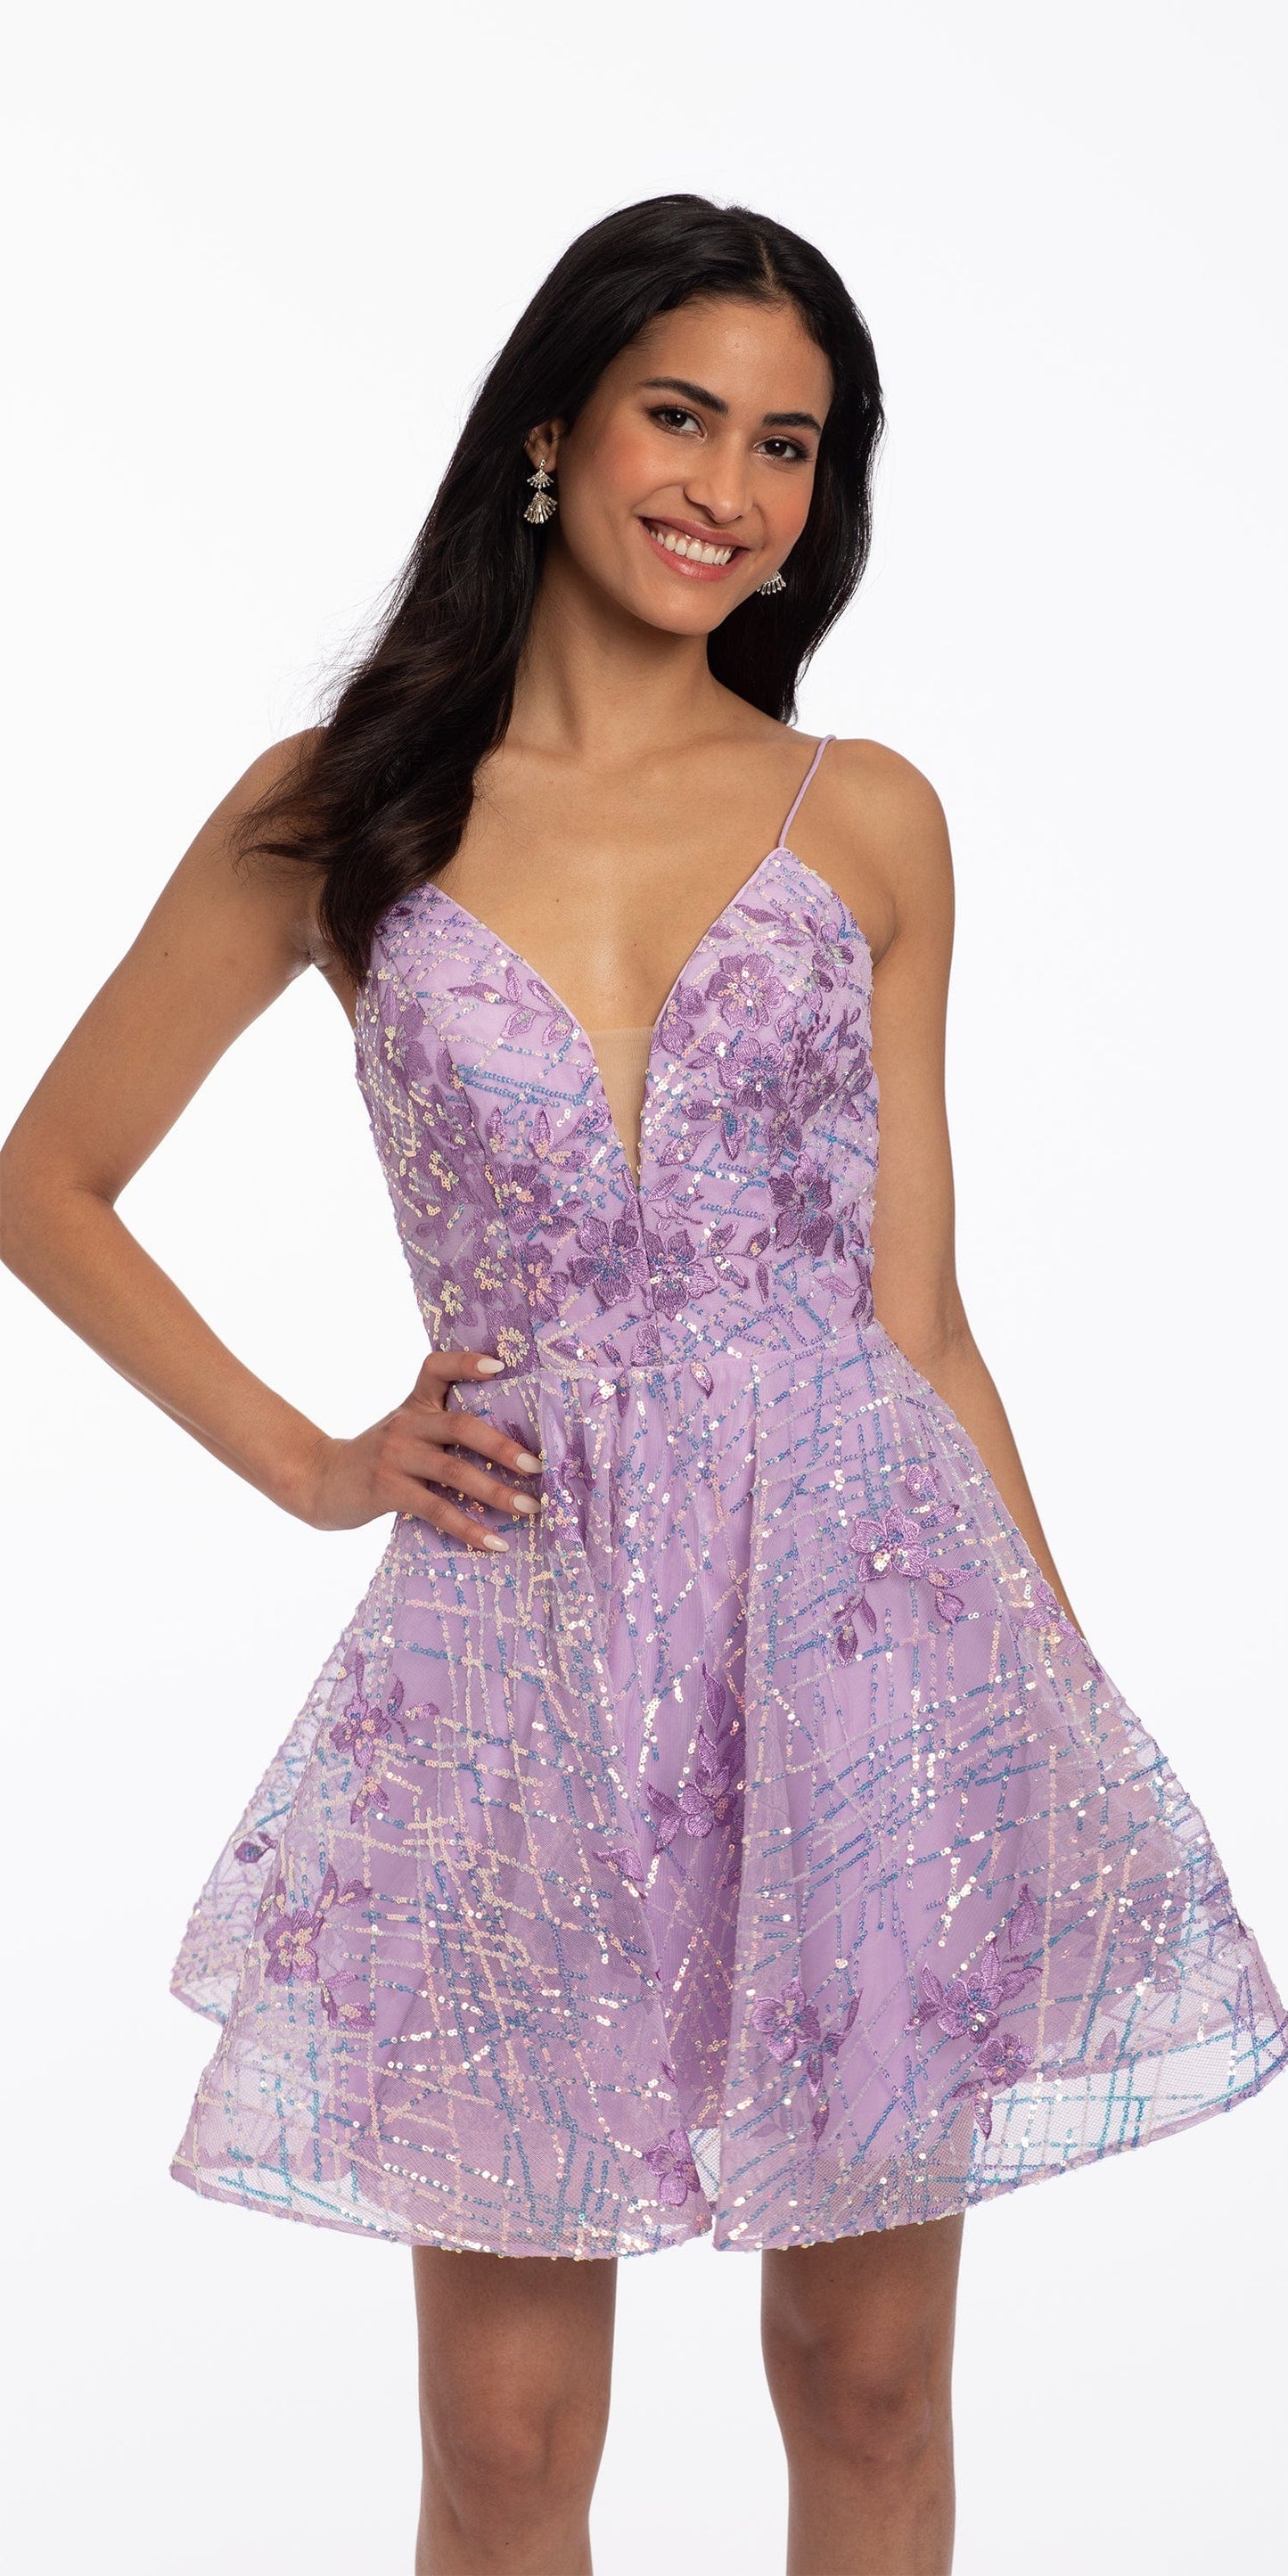 Camille La Vie Embroidered Floral Sequin Mesh Fit and Flare Dress missy / 6 / lilac